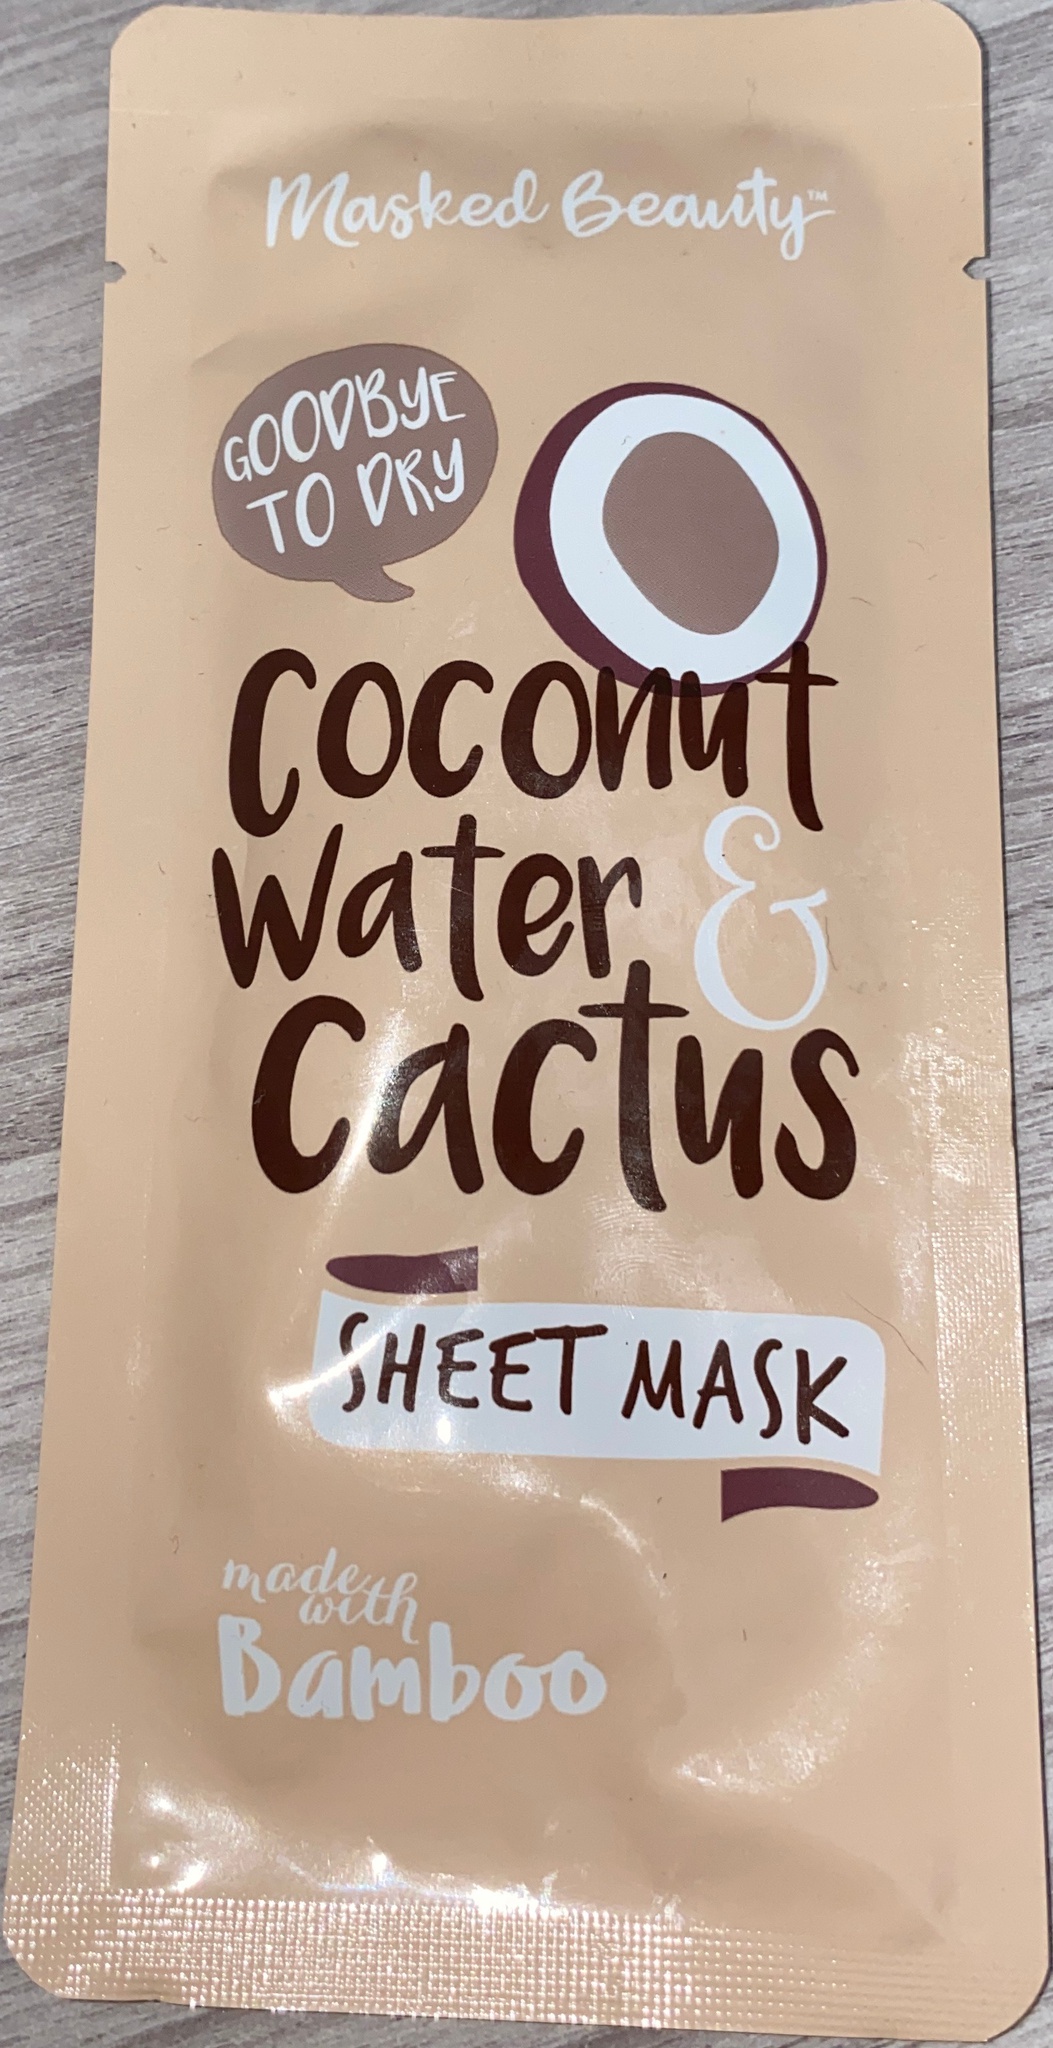 Masked Beauty Coconut Water Cactus Sheet Mask